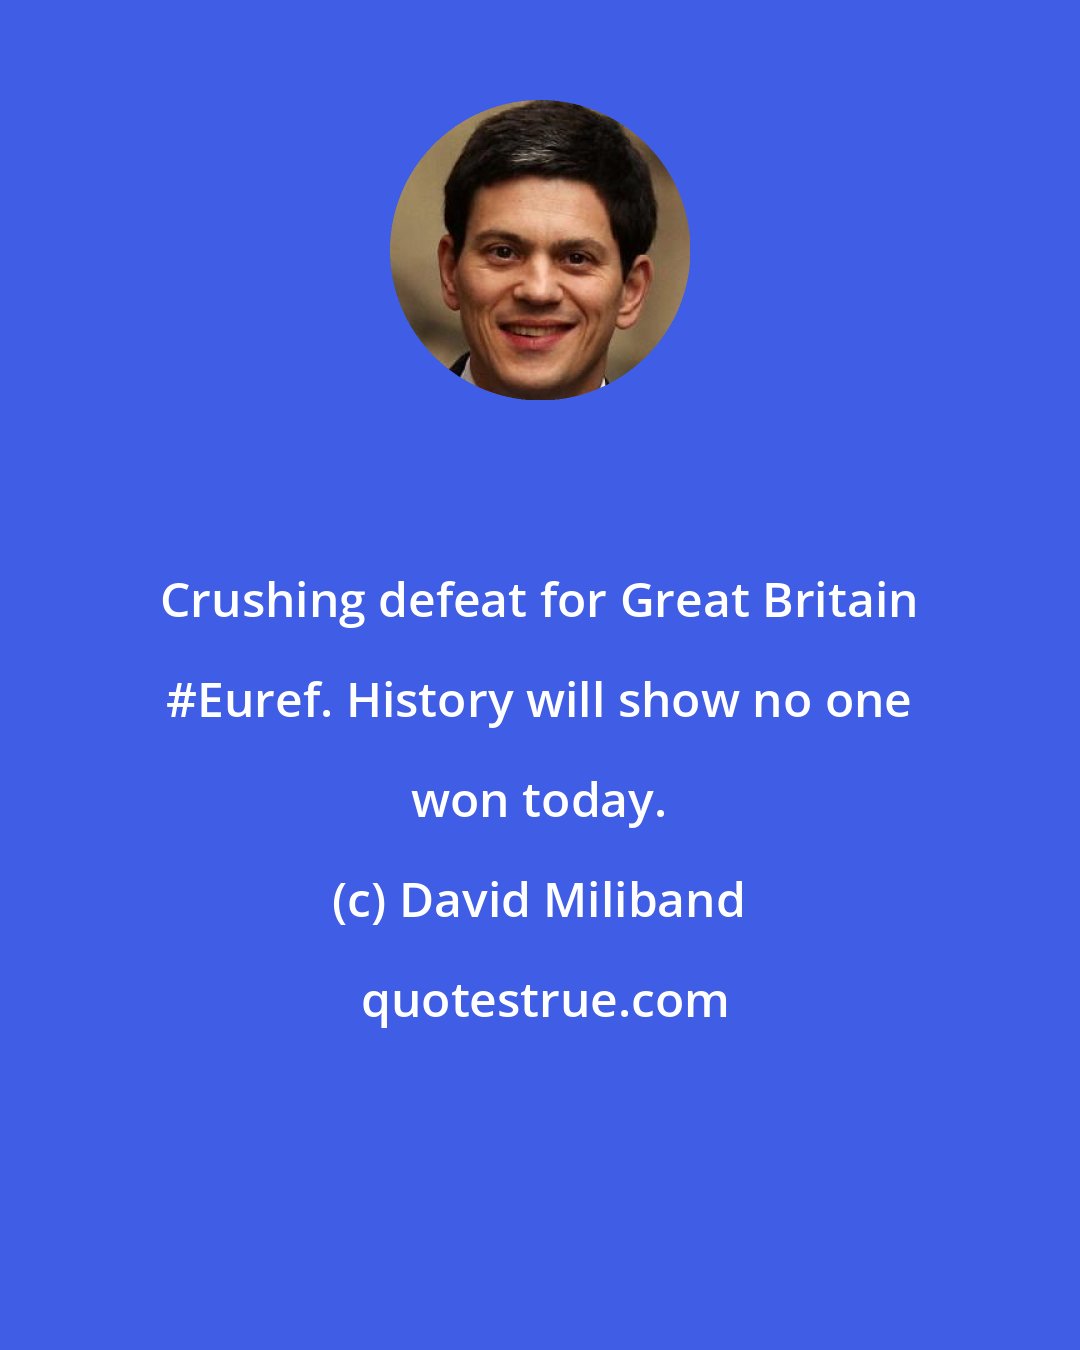 David Miliband: Crushing defeat for Great Britain #Euref. History will show no one won today.